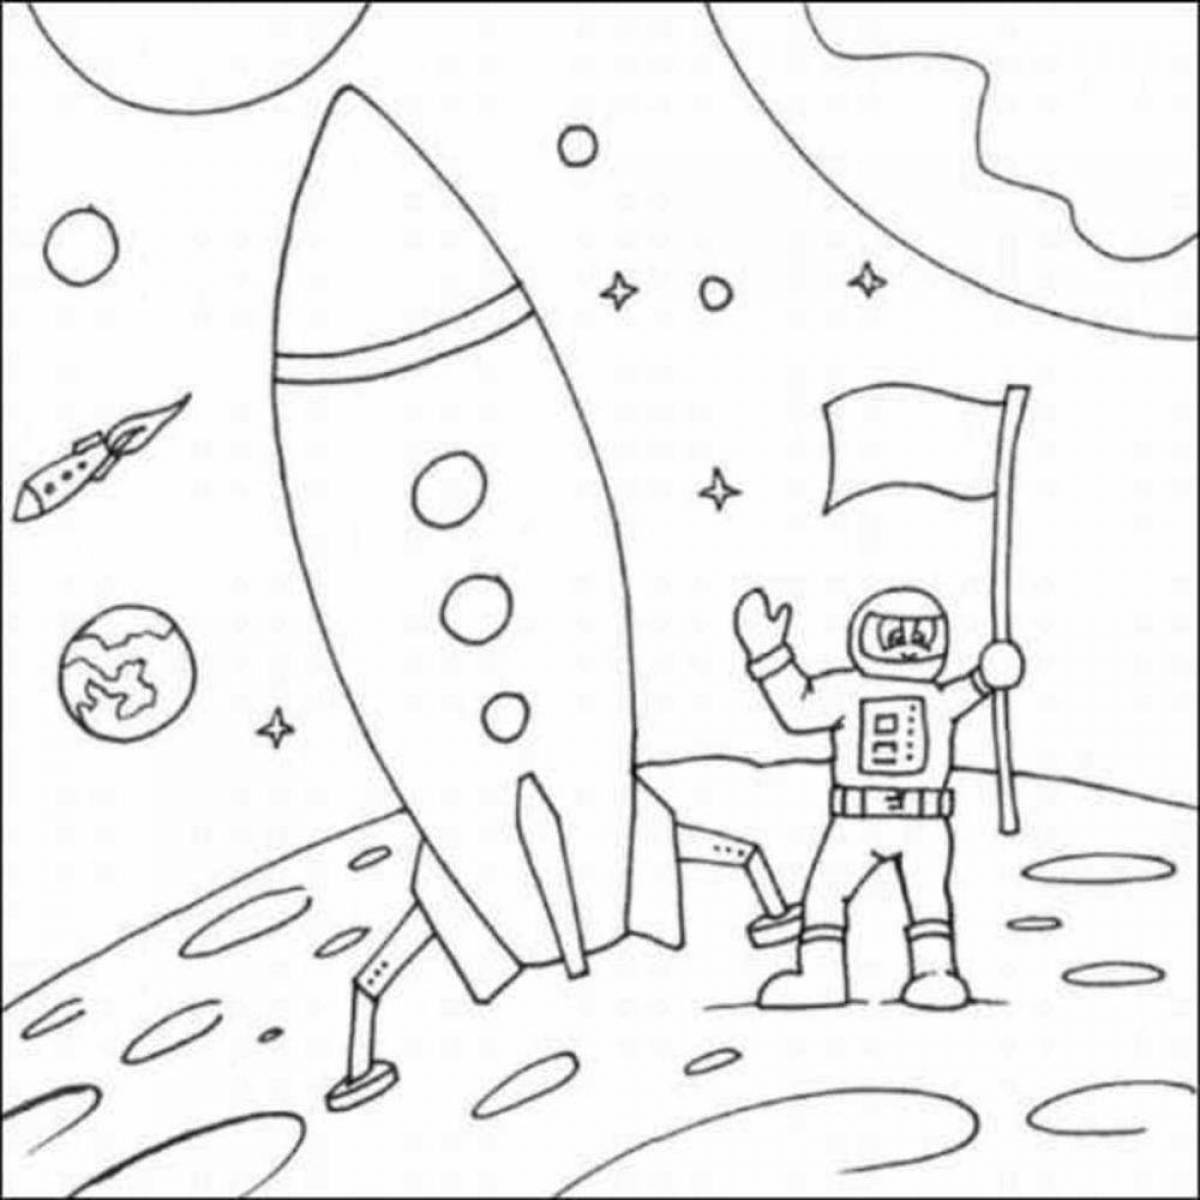 Intergalactic space coloring book for boys